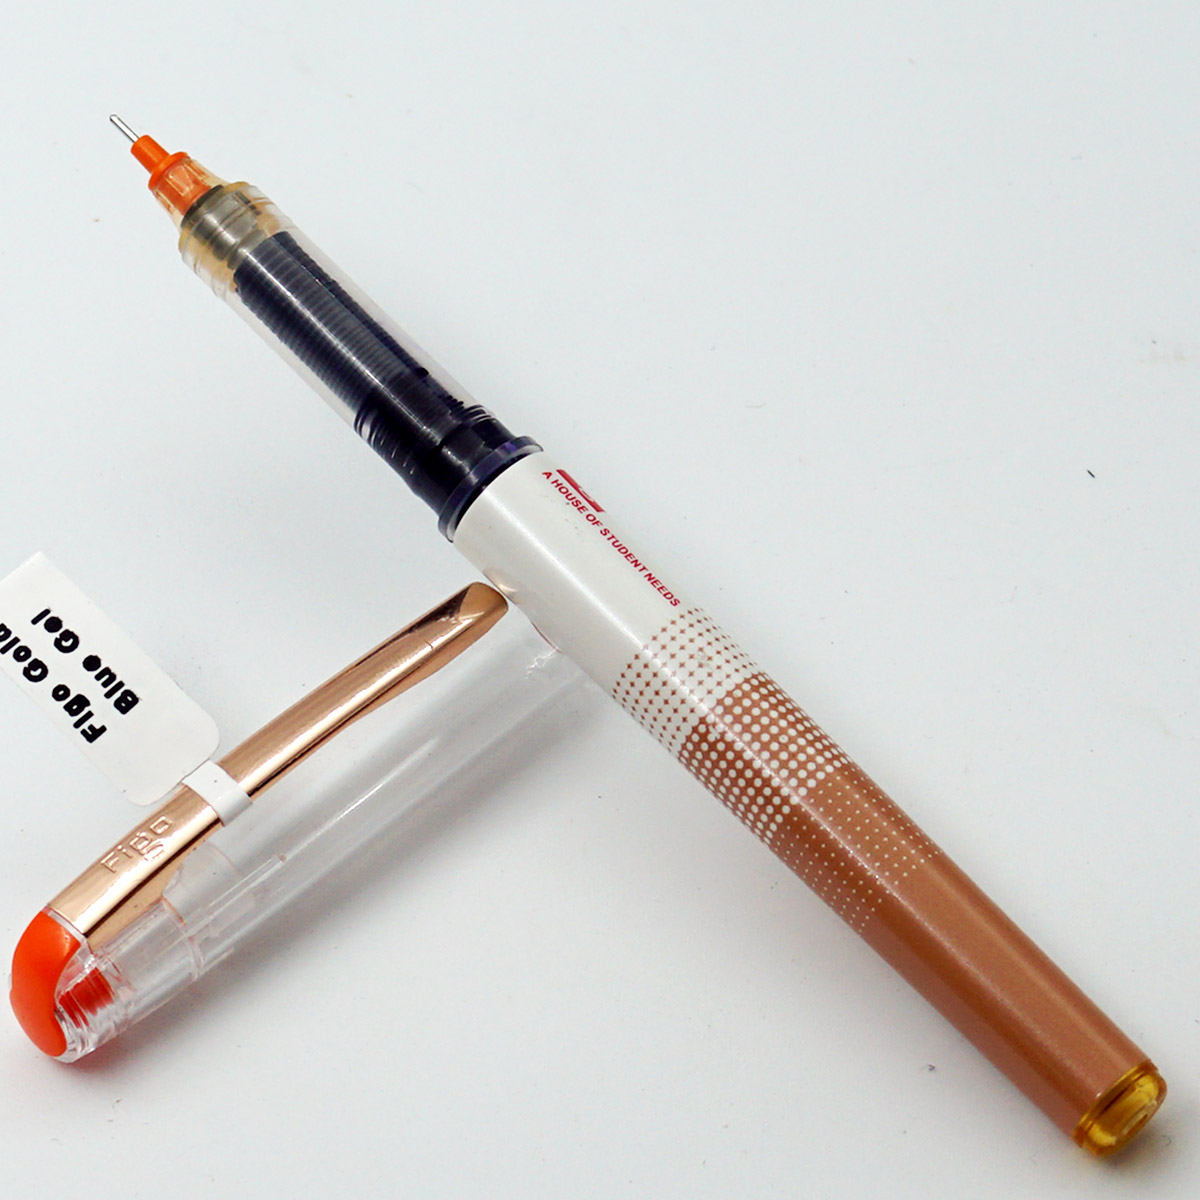 Figo Friends Gold White With Gold Color Body And Gold Clip Blue Writing Cap Type Roller Ball Pen SKU24561